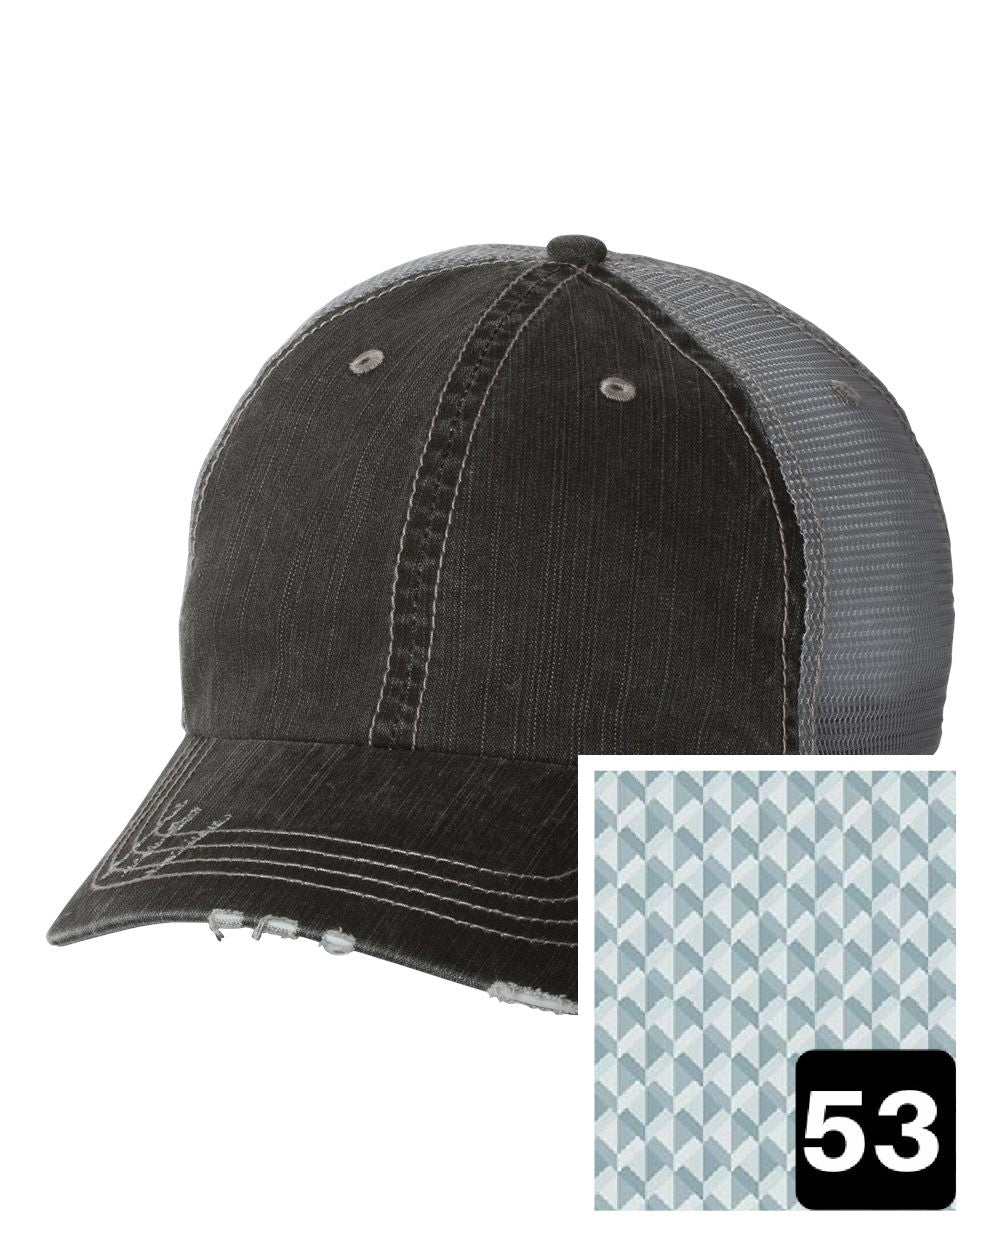 gray distressed trucker hat with multi-color stripe fabric state of Montana